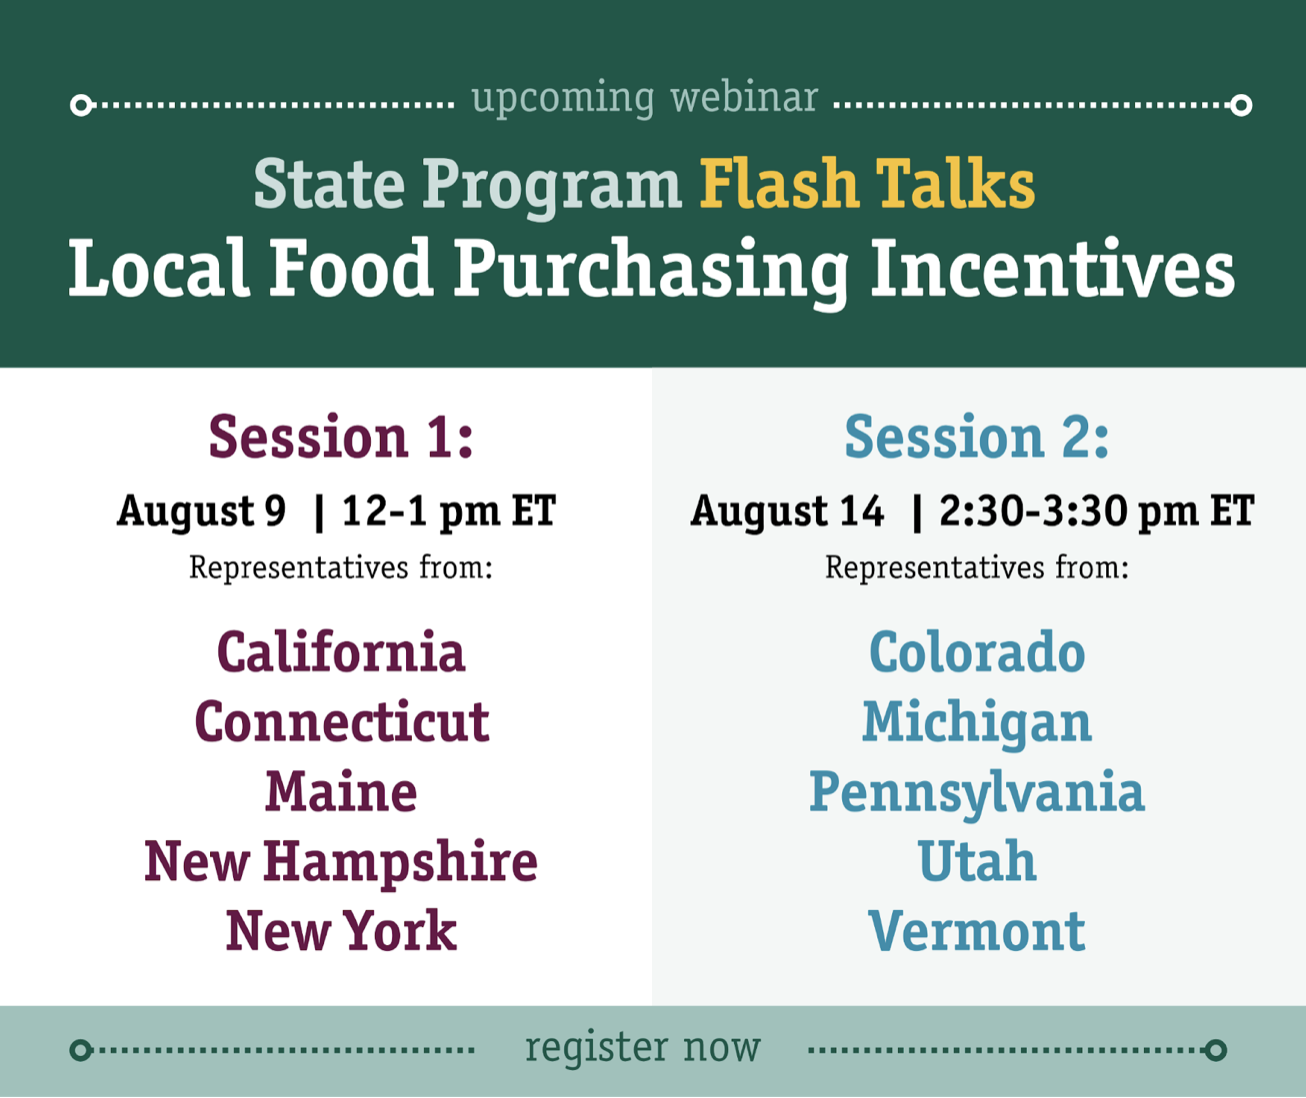 State Program Flash Talks on Local Food Purchasing Incentives will take place on August 9 and 14